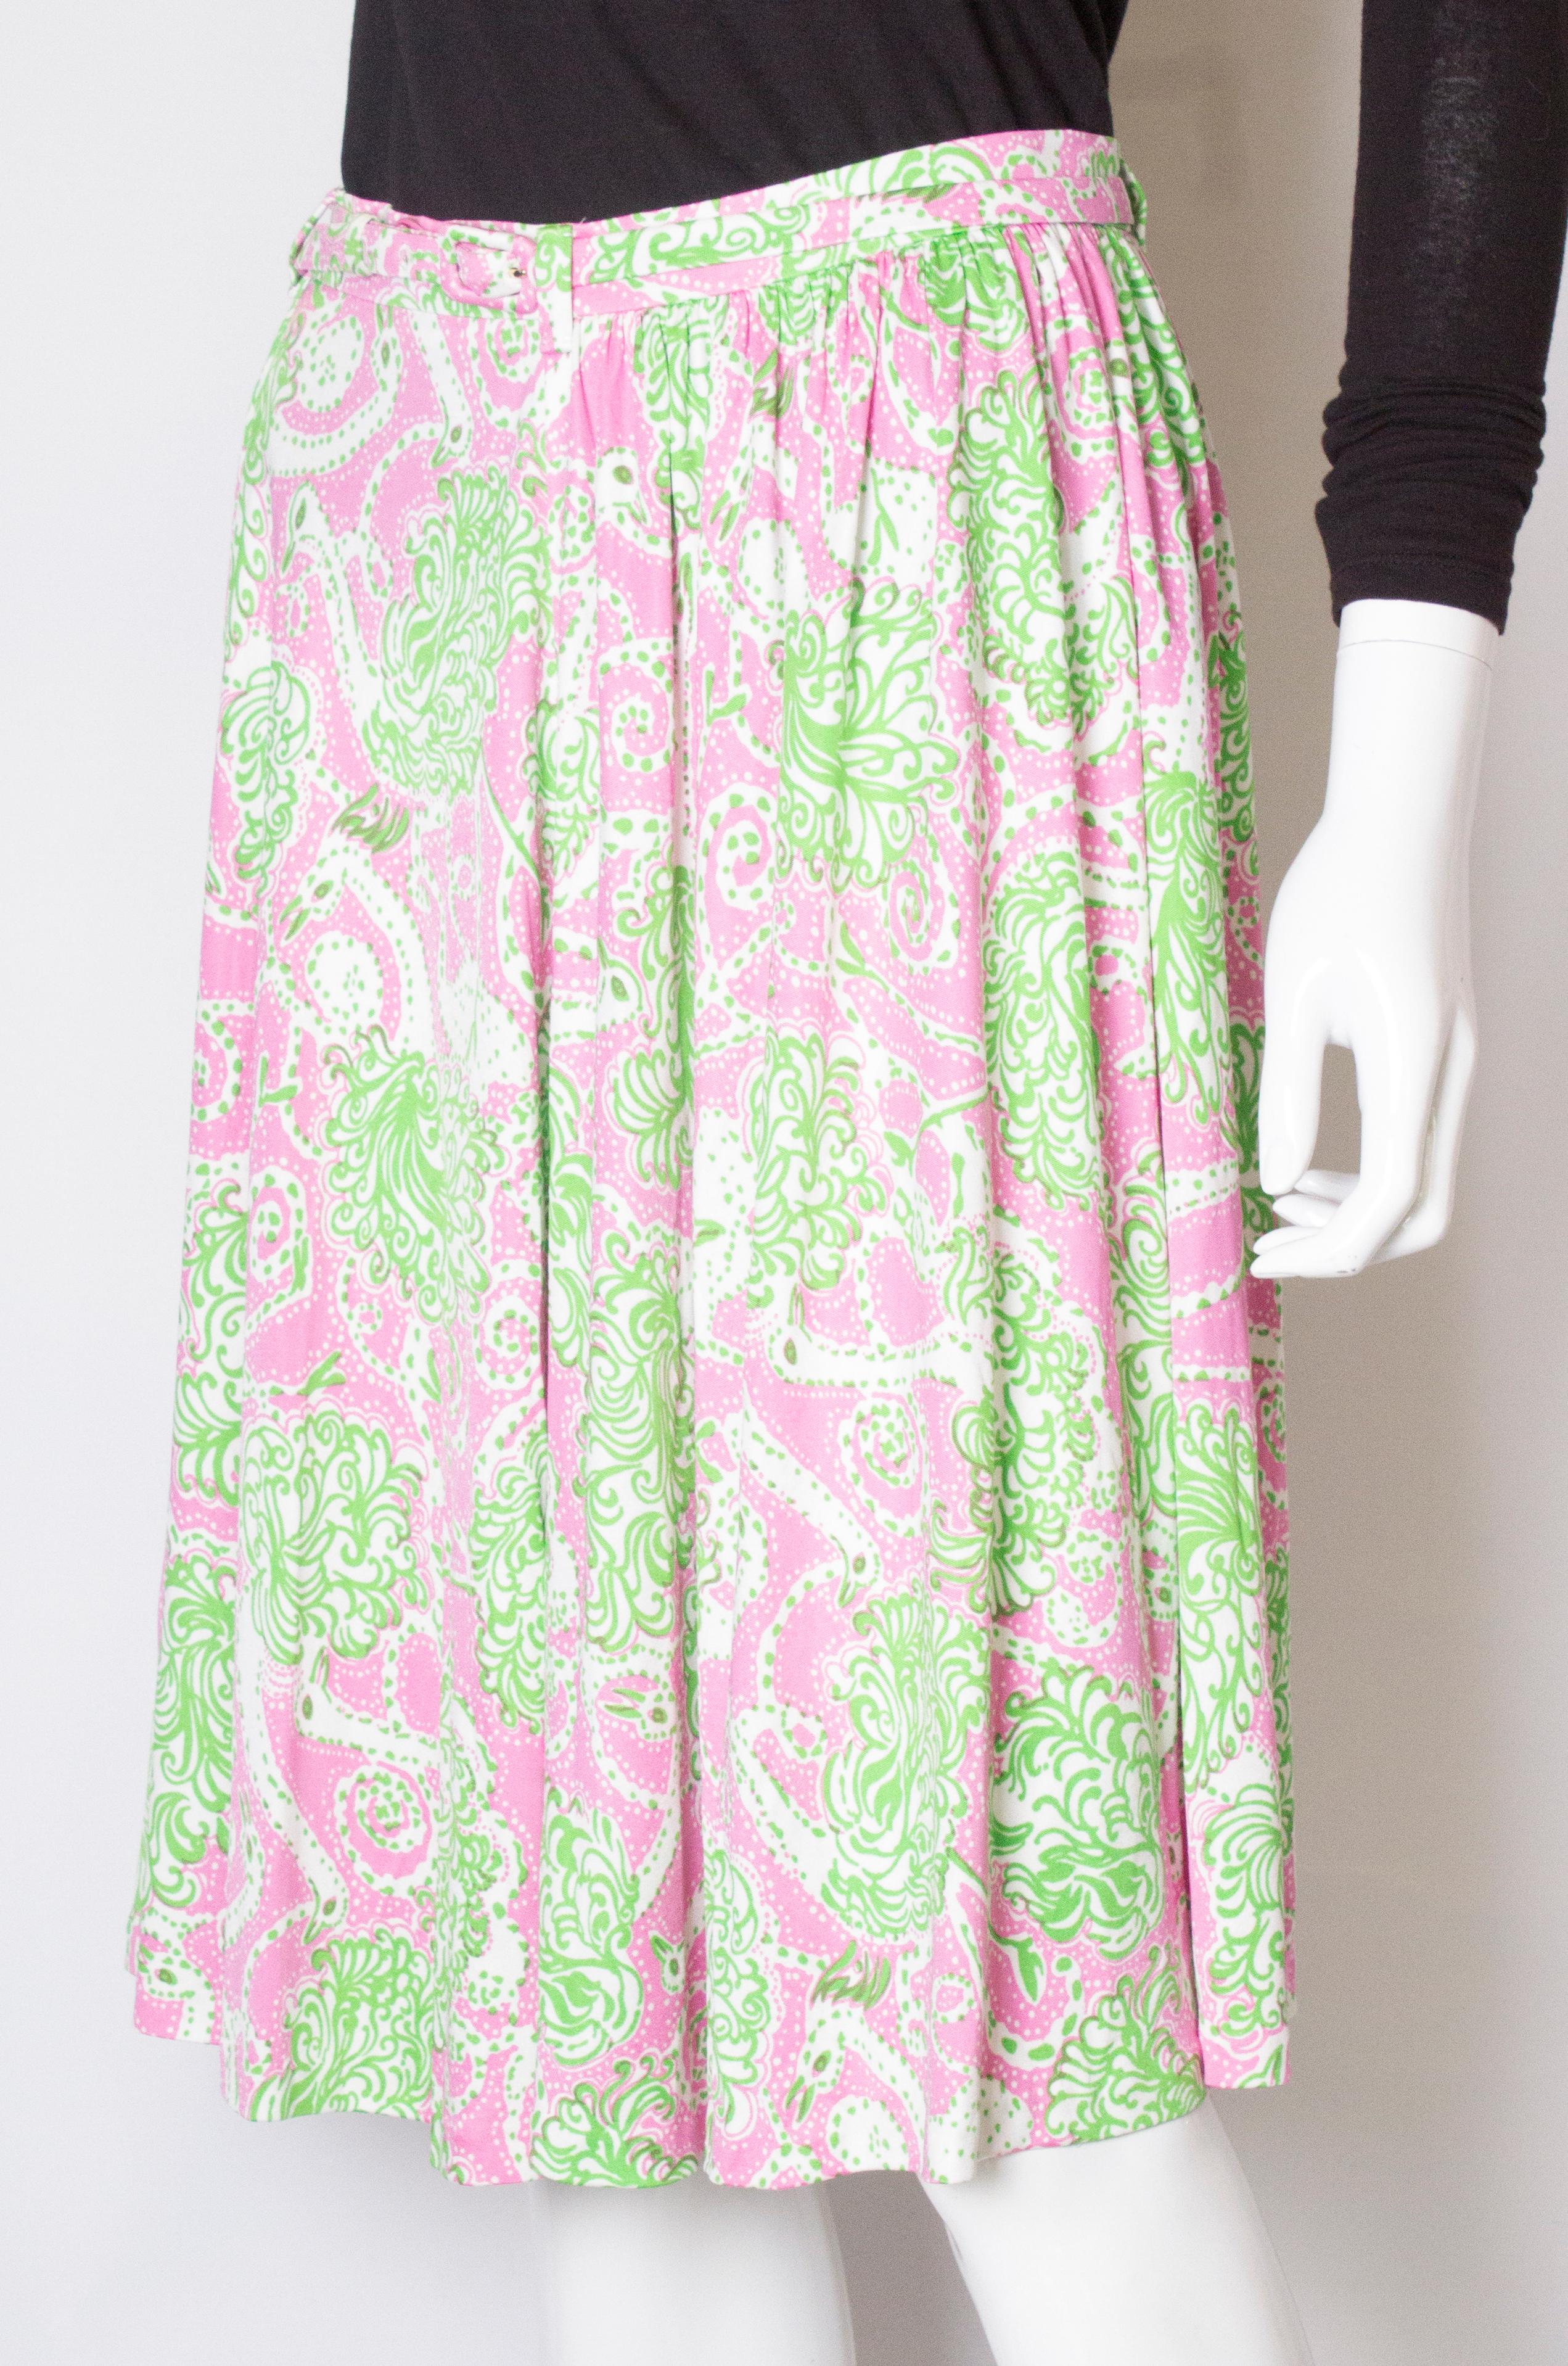 A super skirt for Spring. In a super soft silk jersey in a colourful combination of pink, green and white, the skirt has a central back zip and a self fabric belt.